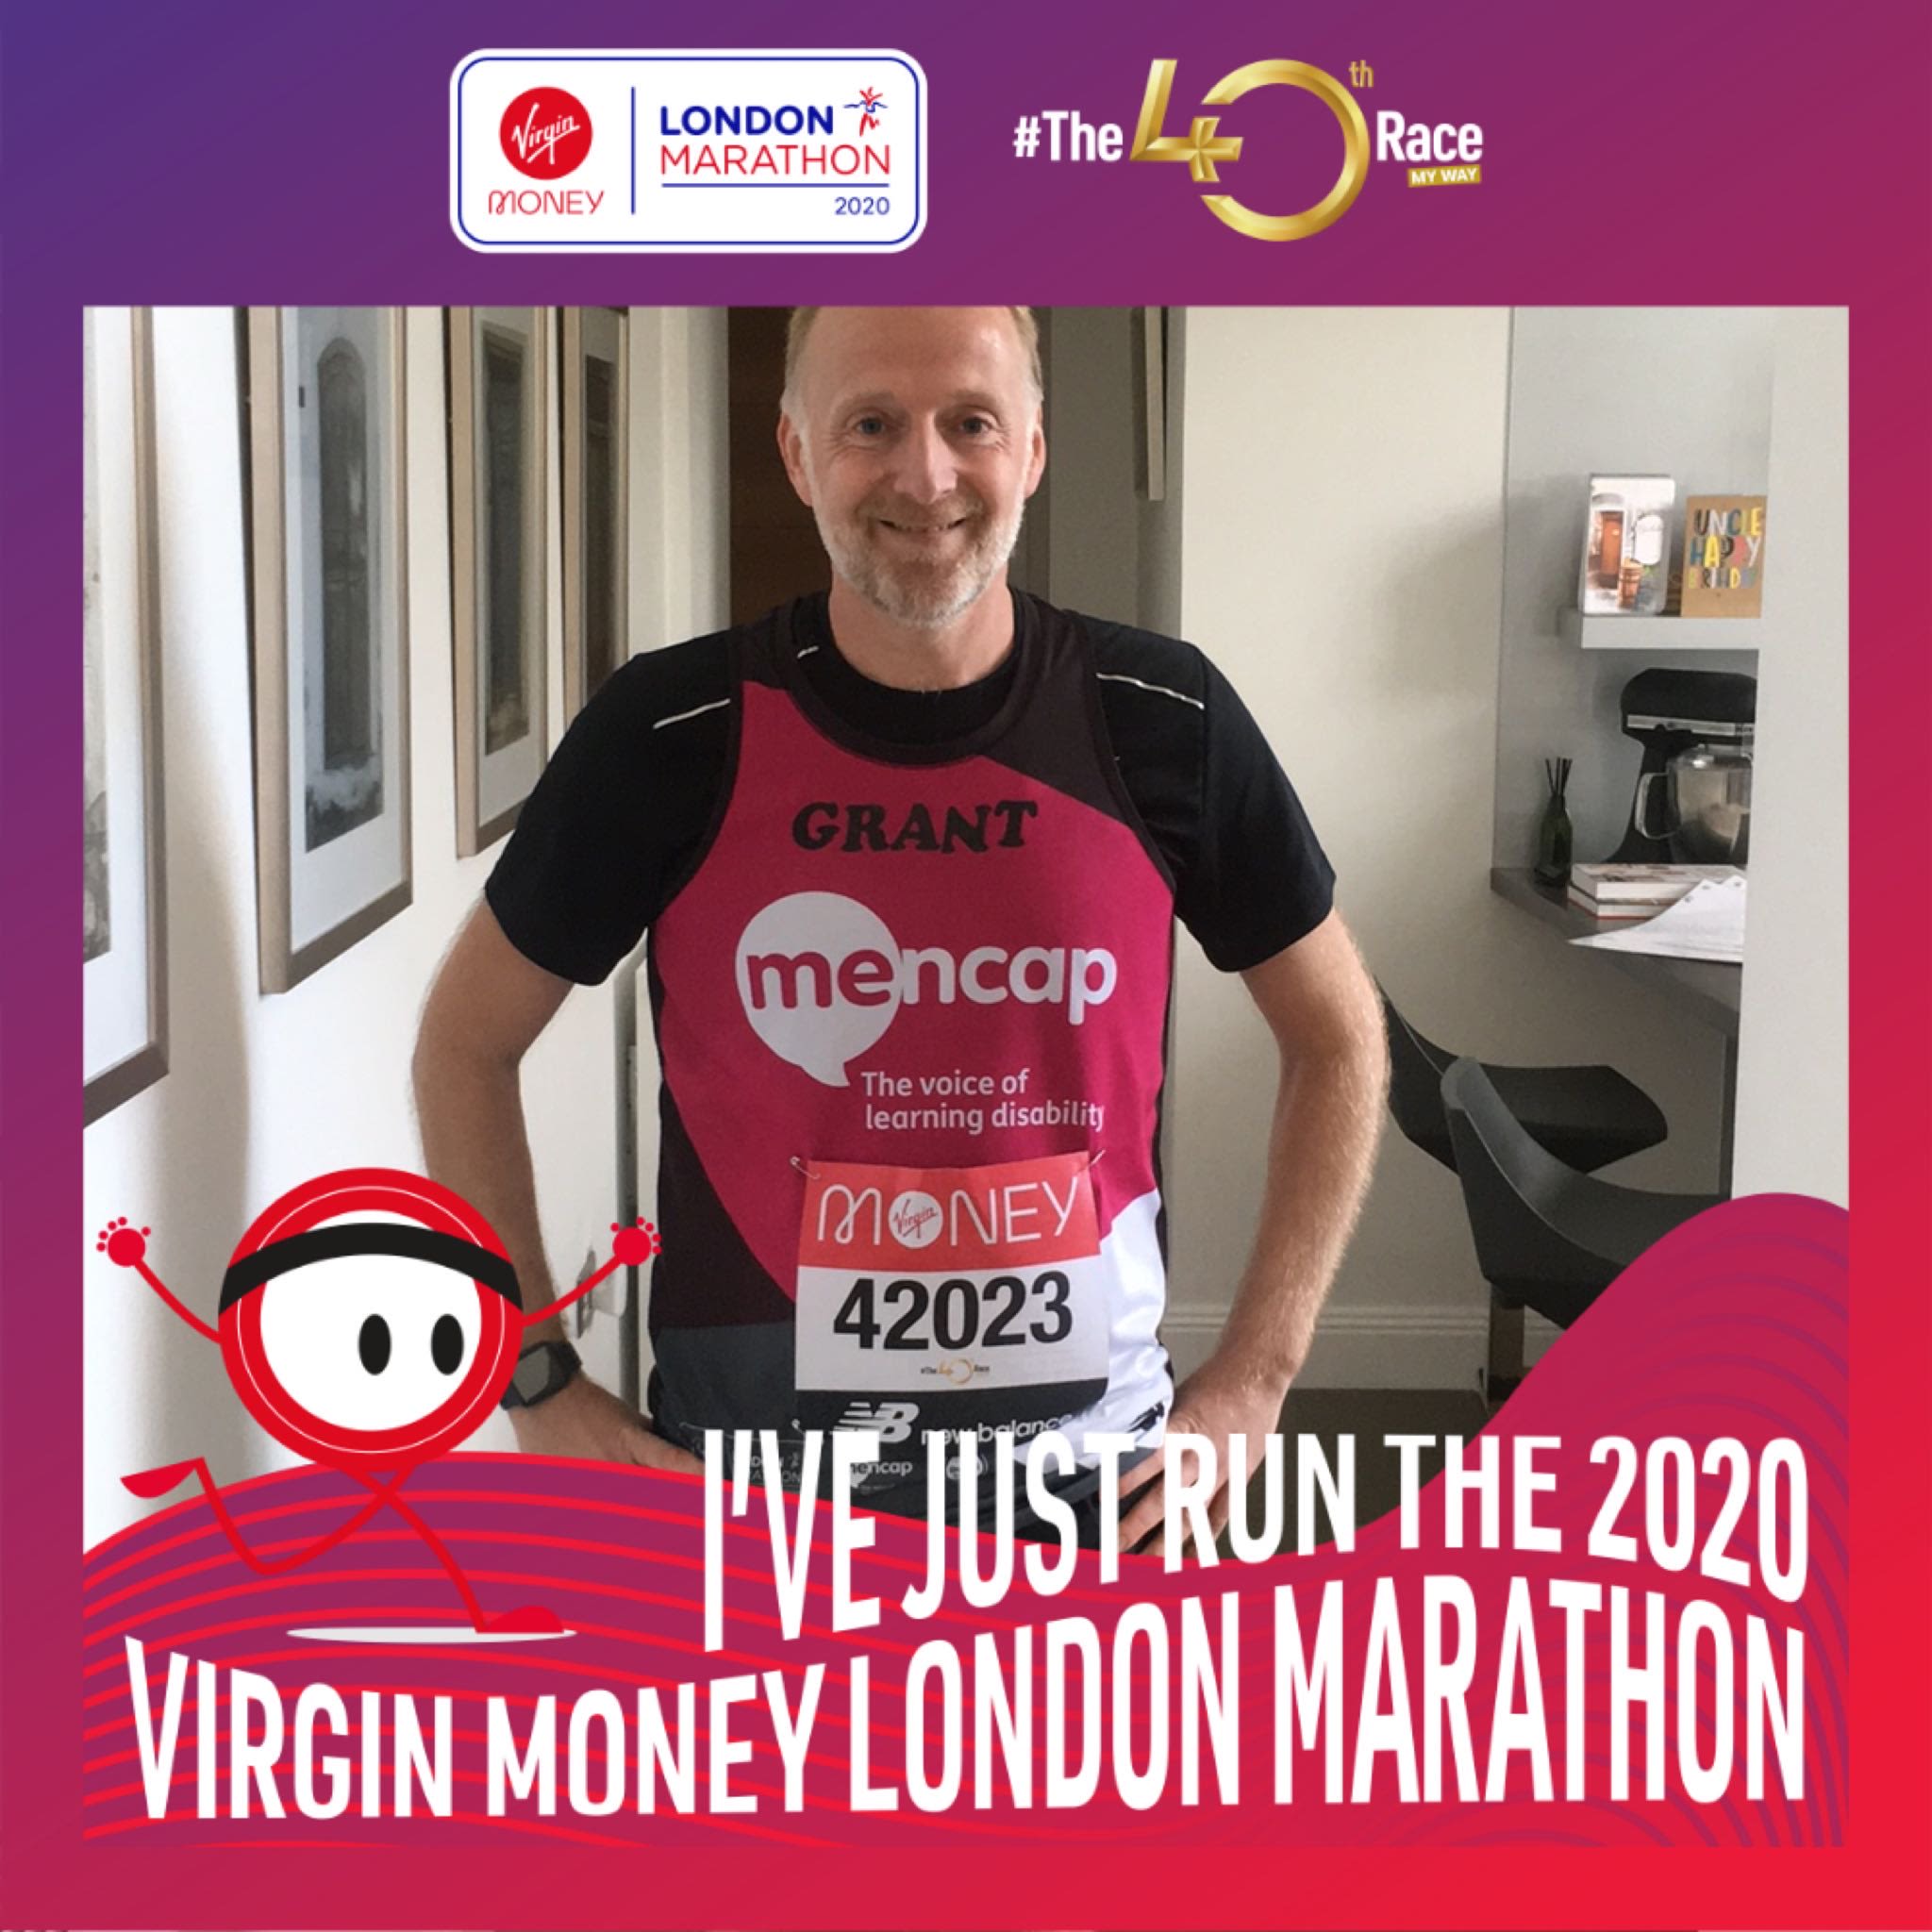 Grant Mackay is the Internal Communications Manager at Virgin Money and on Sunday ran his ninth marathon! Grant ran four 6.5 mile loops close to home in the village of Dunlop, Scotland.